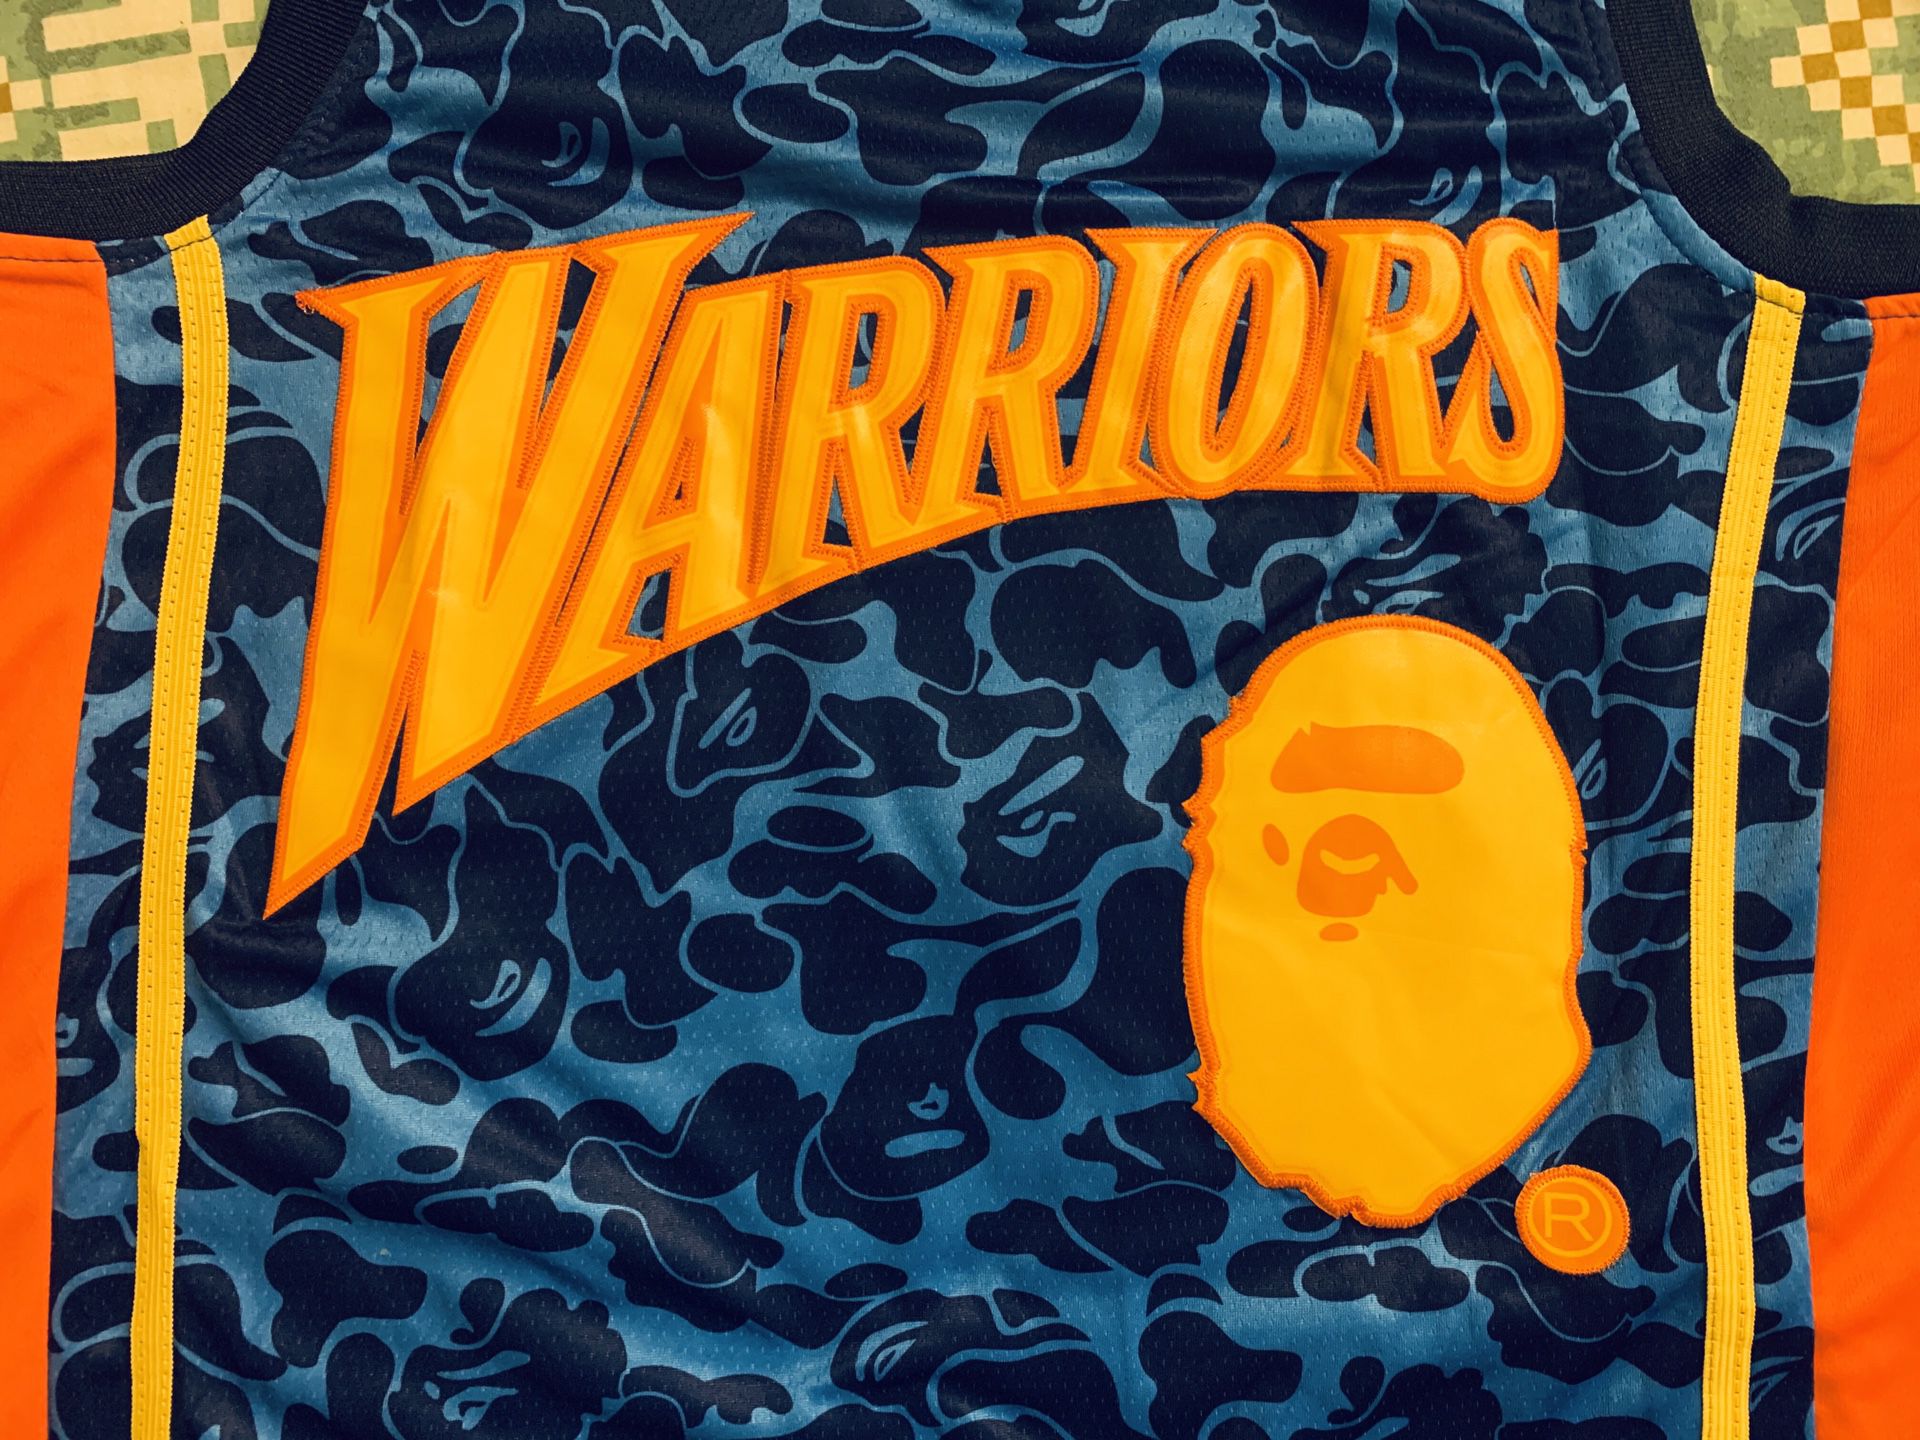 Golden State Warriors Stephen Curry NBA Ultra Game Blue T-Shirt for Sale in  Modesto, CA - OfferUp